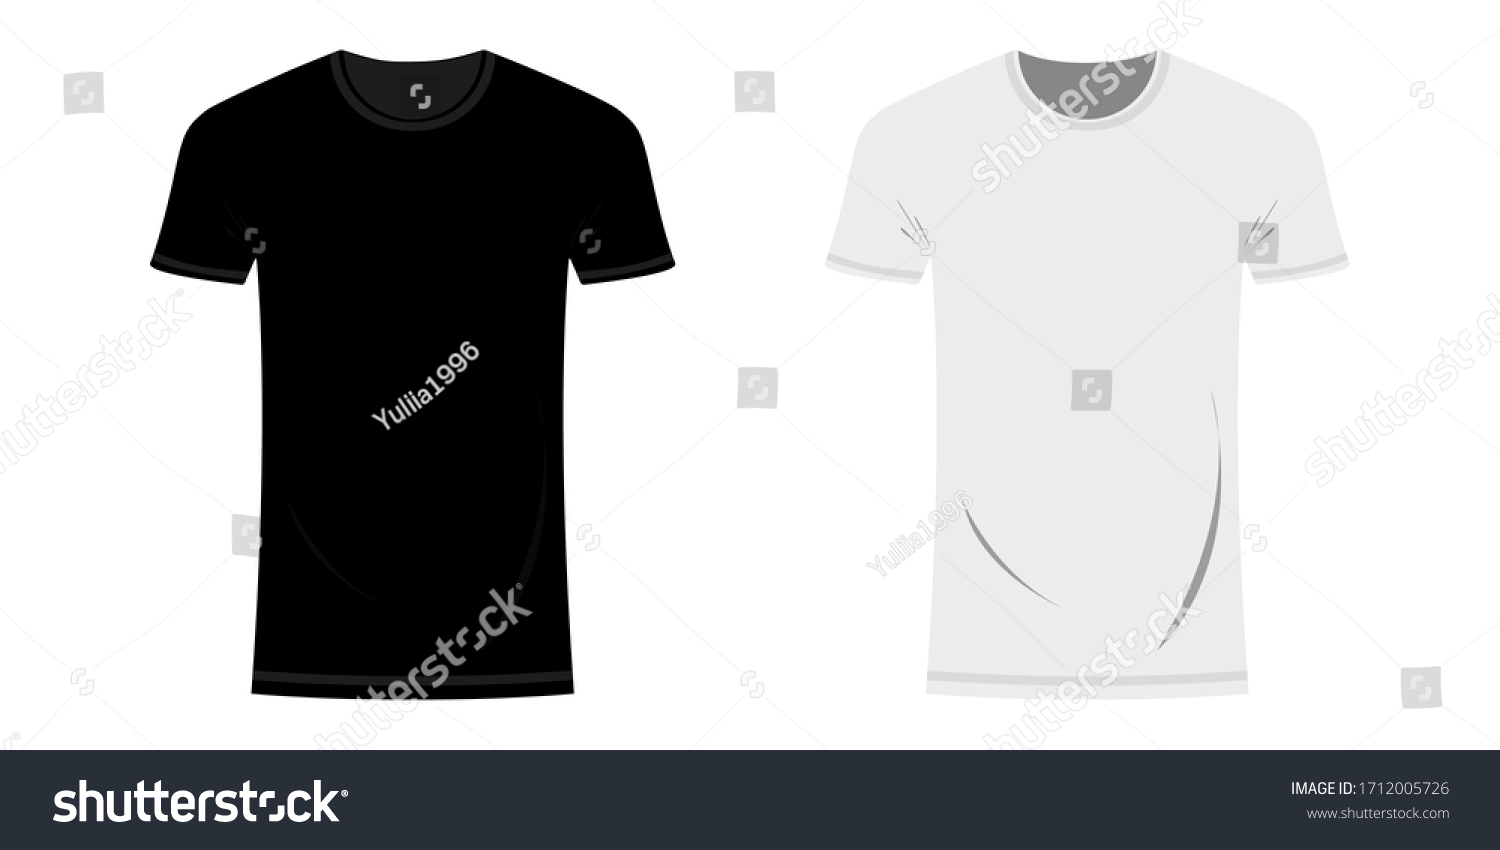 Black White Tshirt Layout Template Design Stock Vector (Royalty Free ...